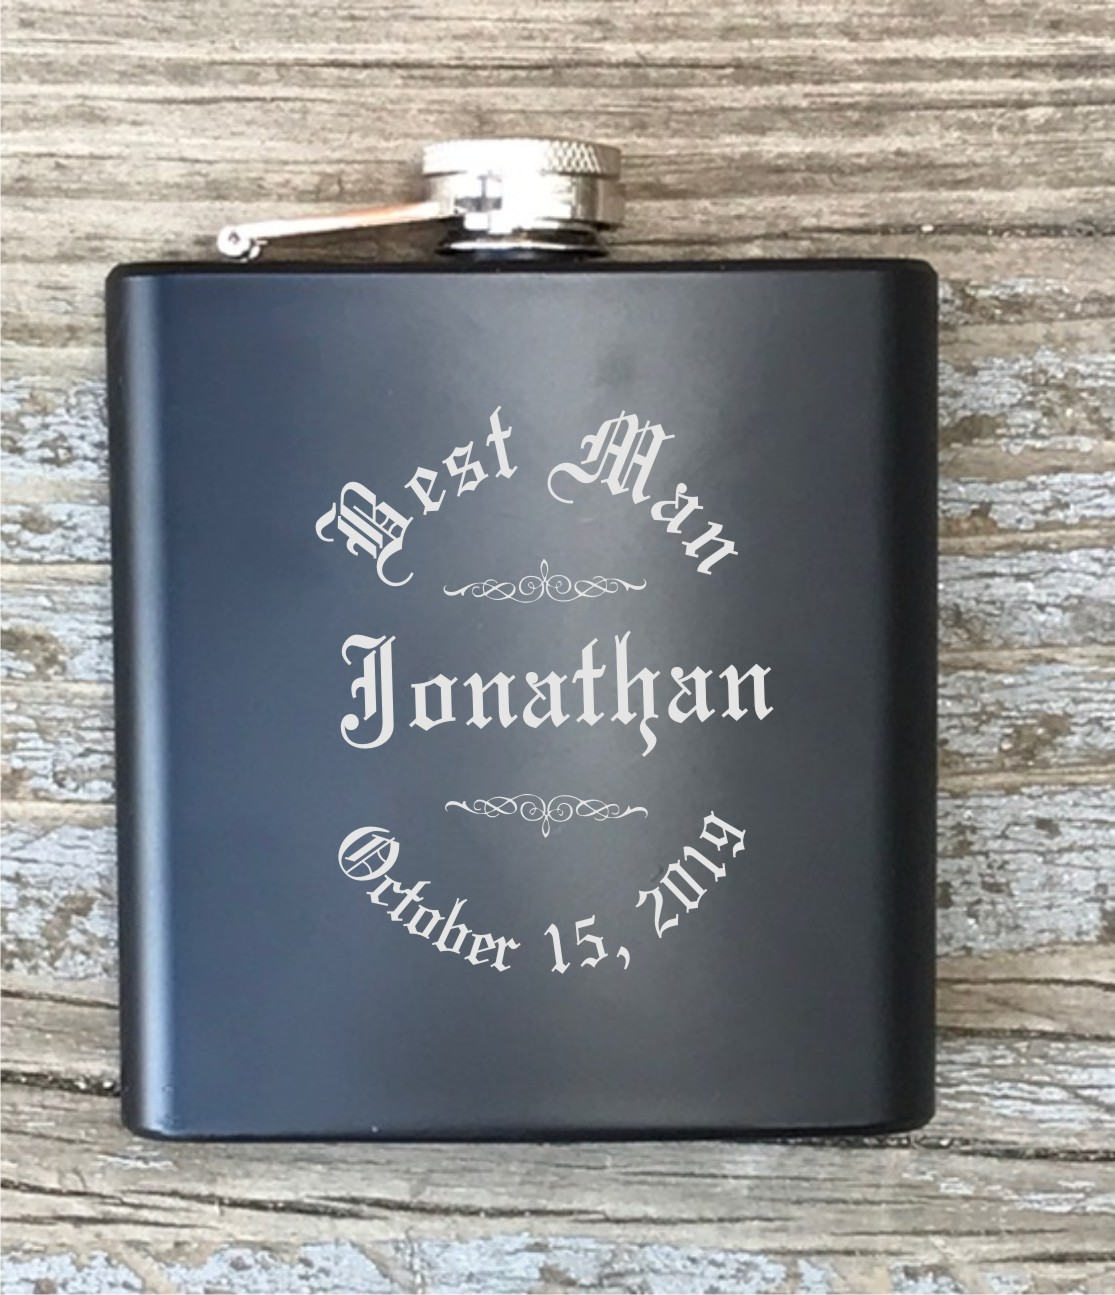 Personalized Best Man Flask Old English Circle Engraved Bachelor Party Gift Groomsmen